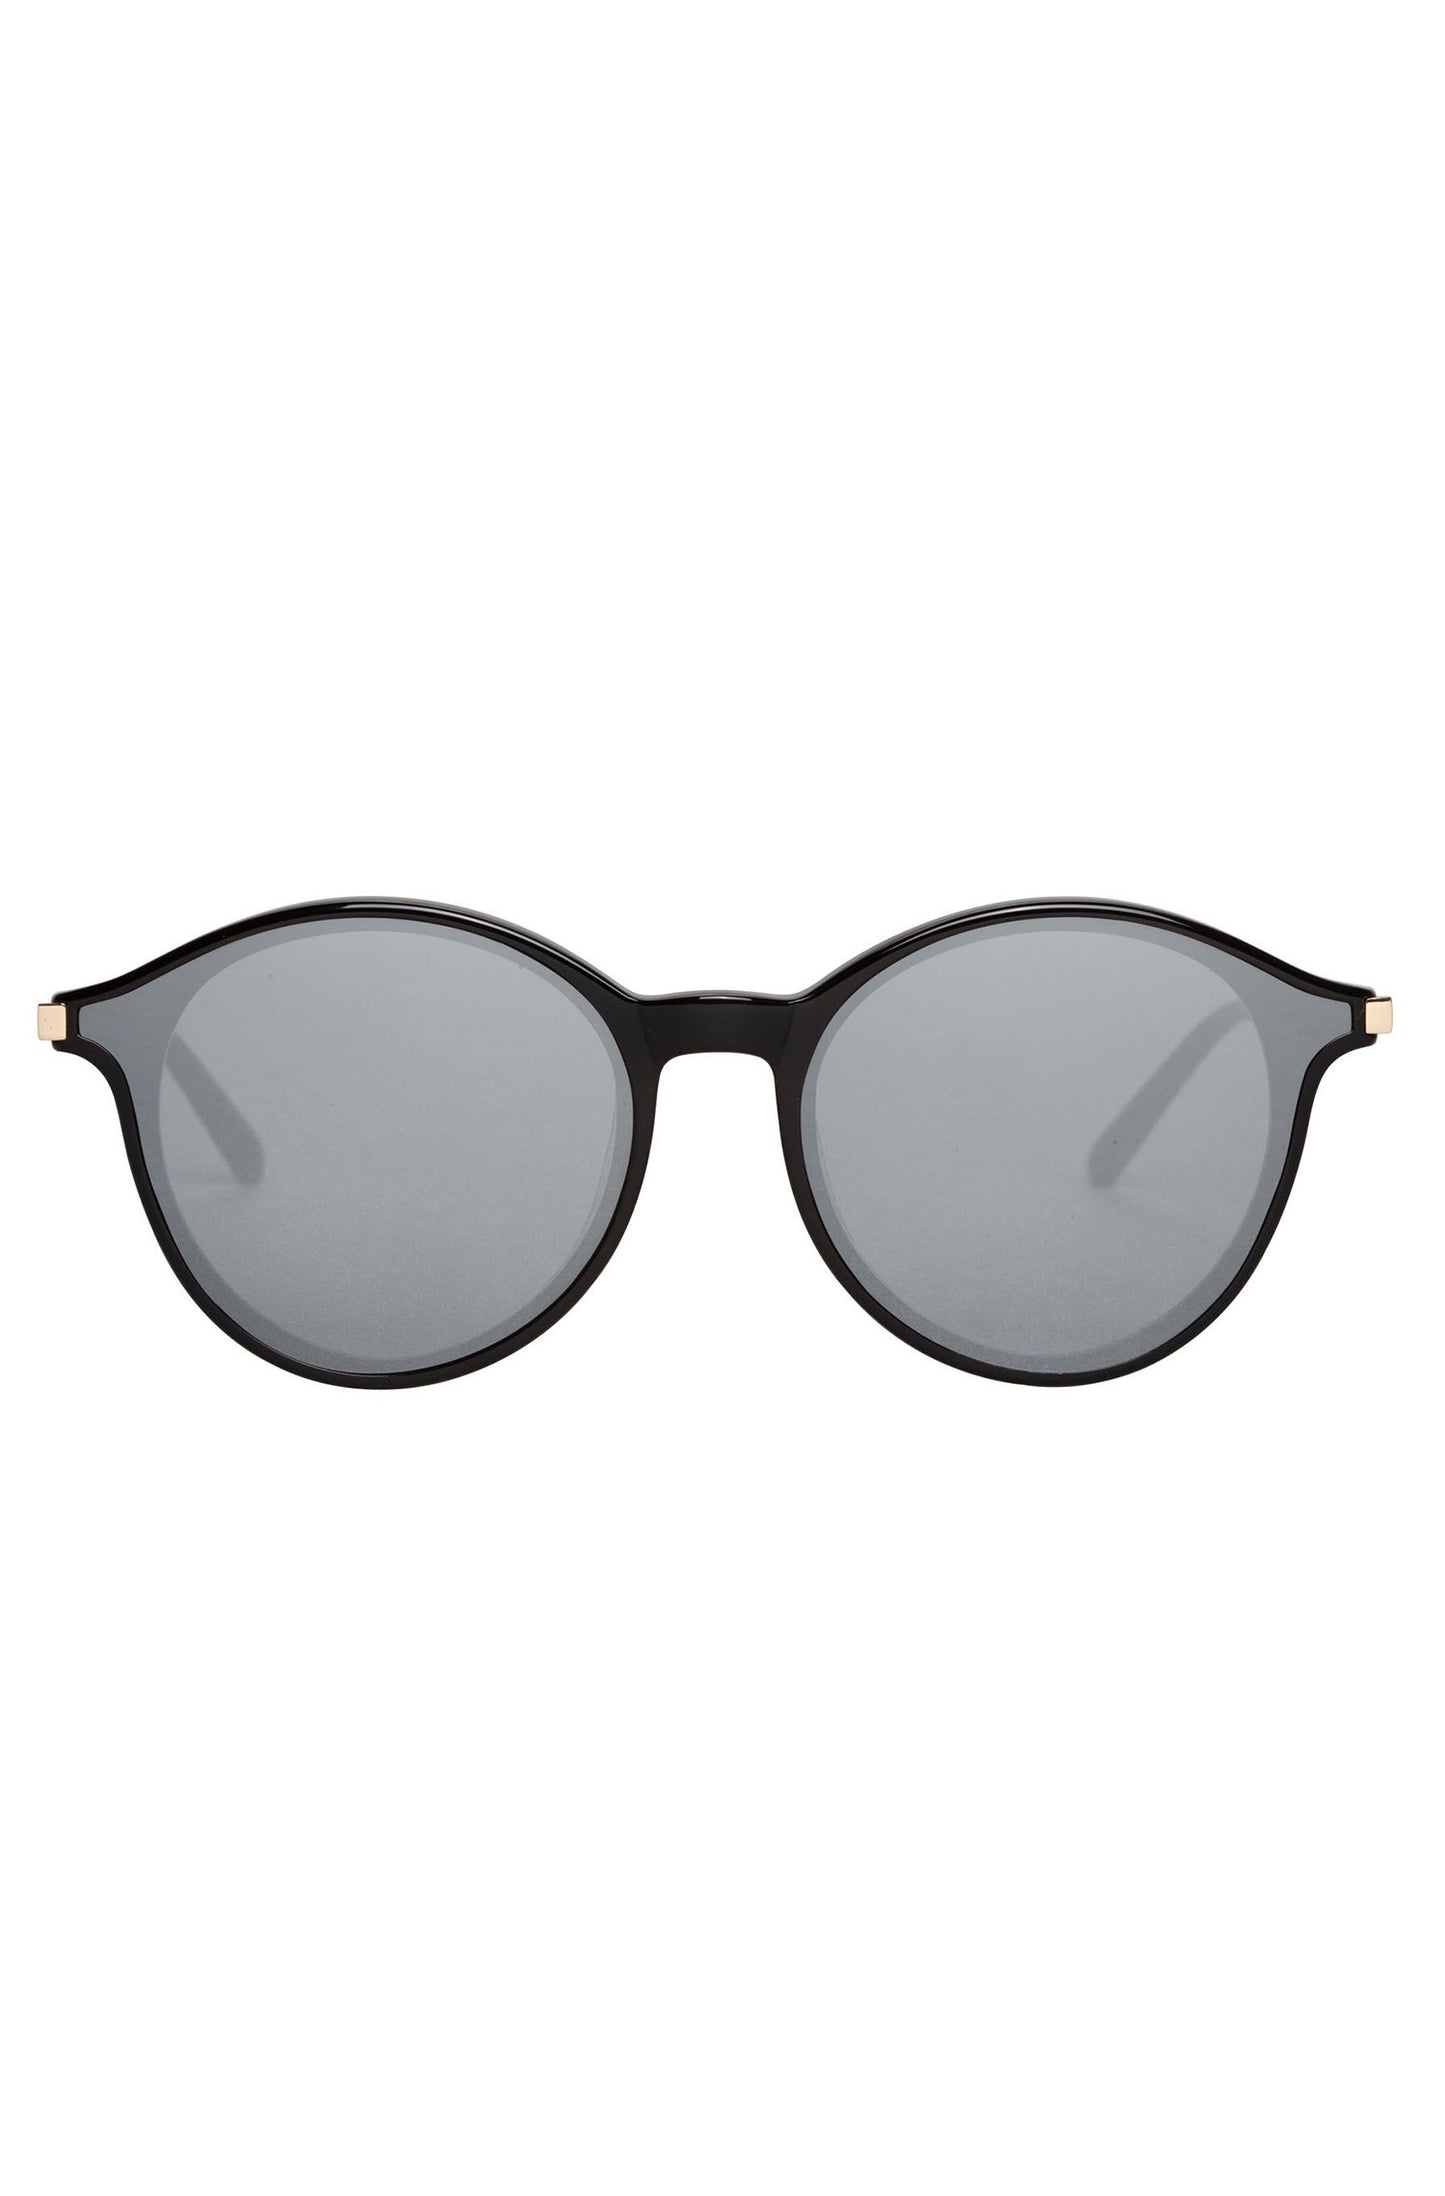 A pair of black SUMMIT SUNGLASSES BY BONNIE CLYDE on a white background.-1241161662545